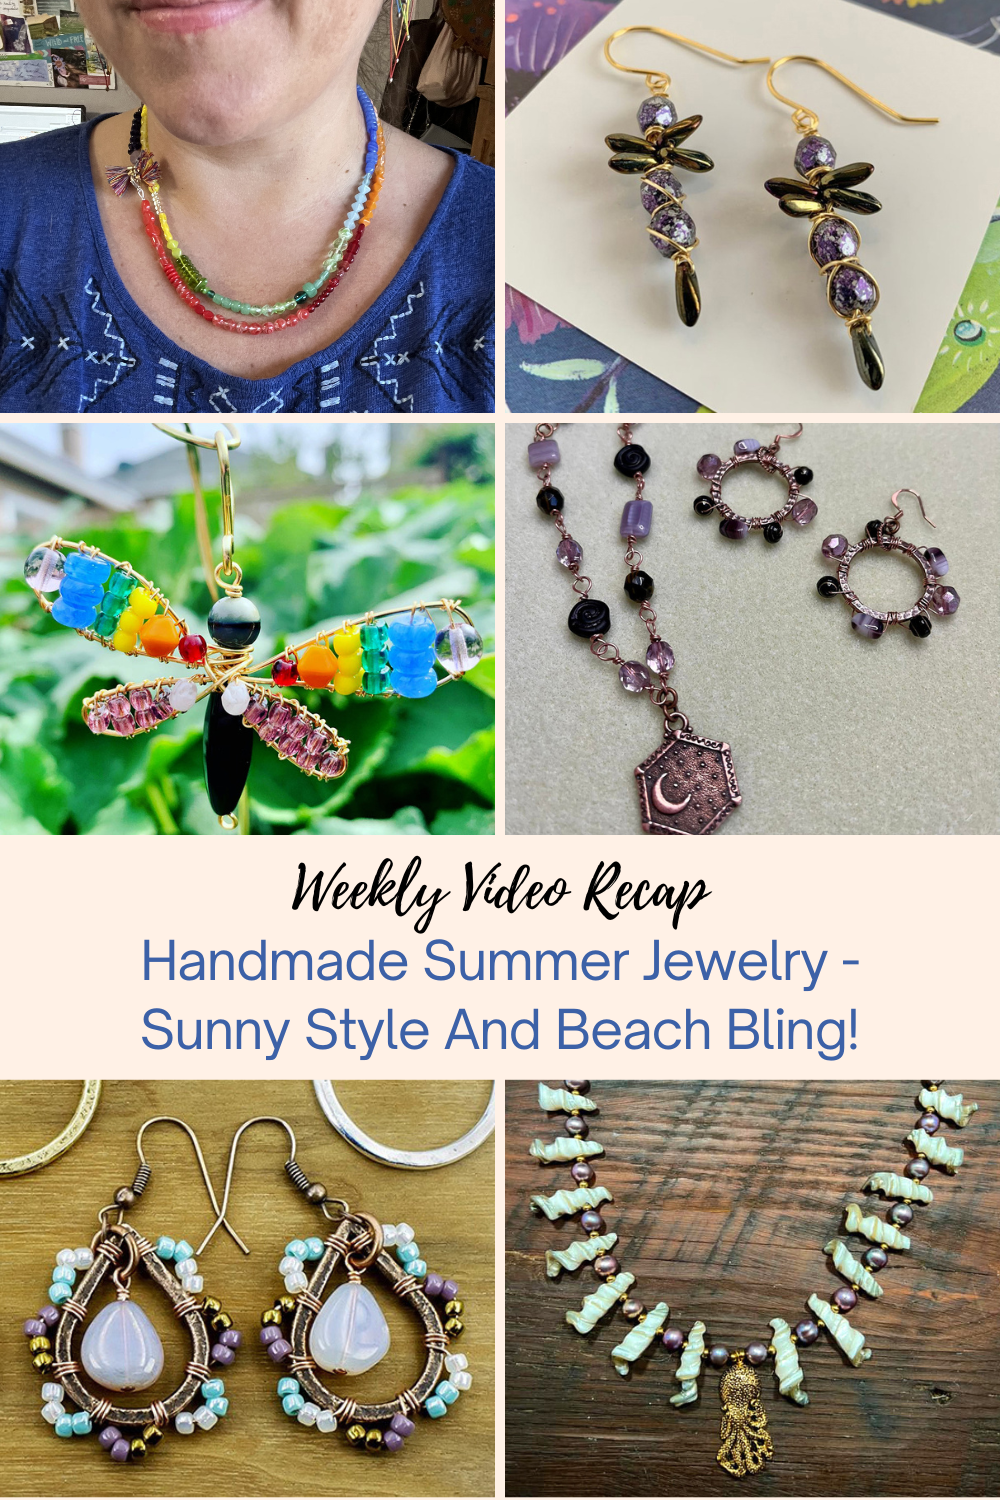 Handmade Summer Jewelry - Sunny Style And Beach Bling! Collage